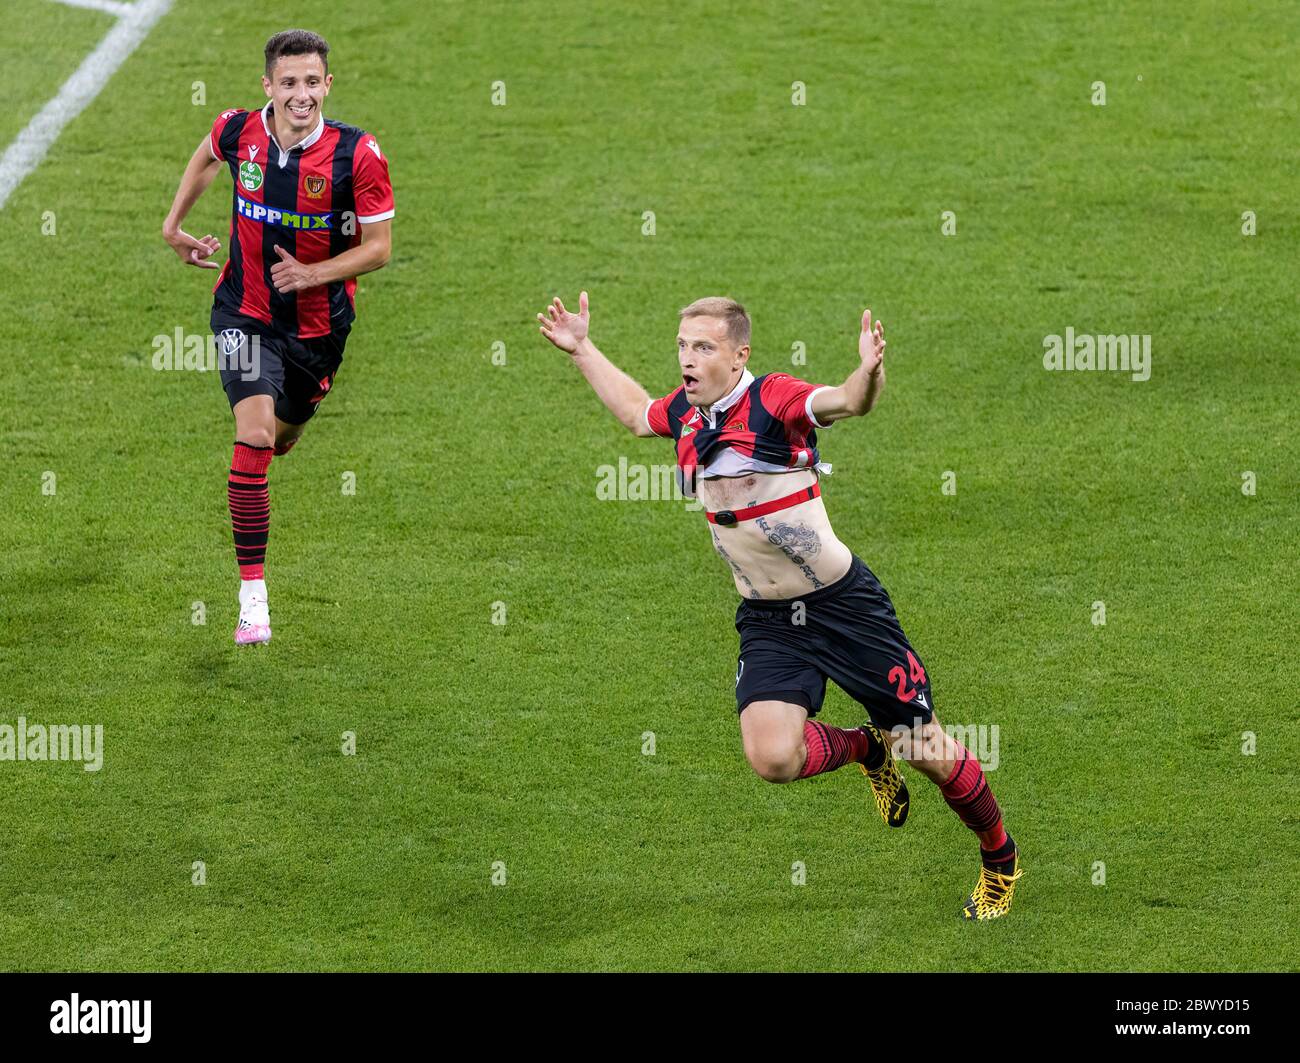 BUDAPEST, HUNGARY - JUNE 3: (r-l) Djordje Kamber of Budapest Honved celebrates his goal with Norbert Szendrei of Budapest Honved during the Hungarian Cup Final match between Budapest Honved and Mezokovesd Zsory FC at Puskas Arena on June 3, 2020 in Budapest, Hungary. Stock Photo